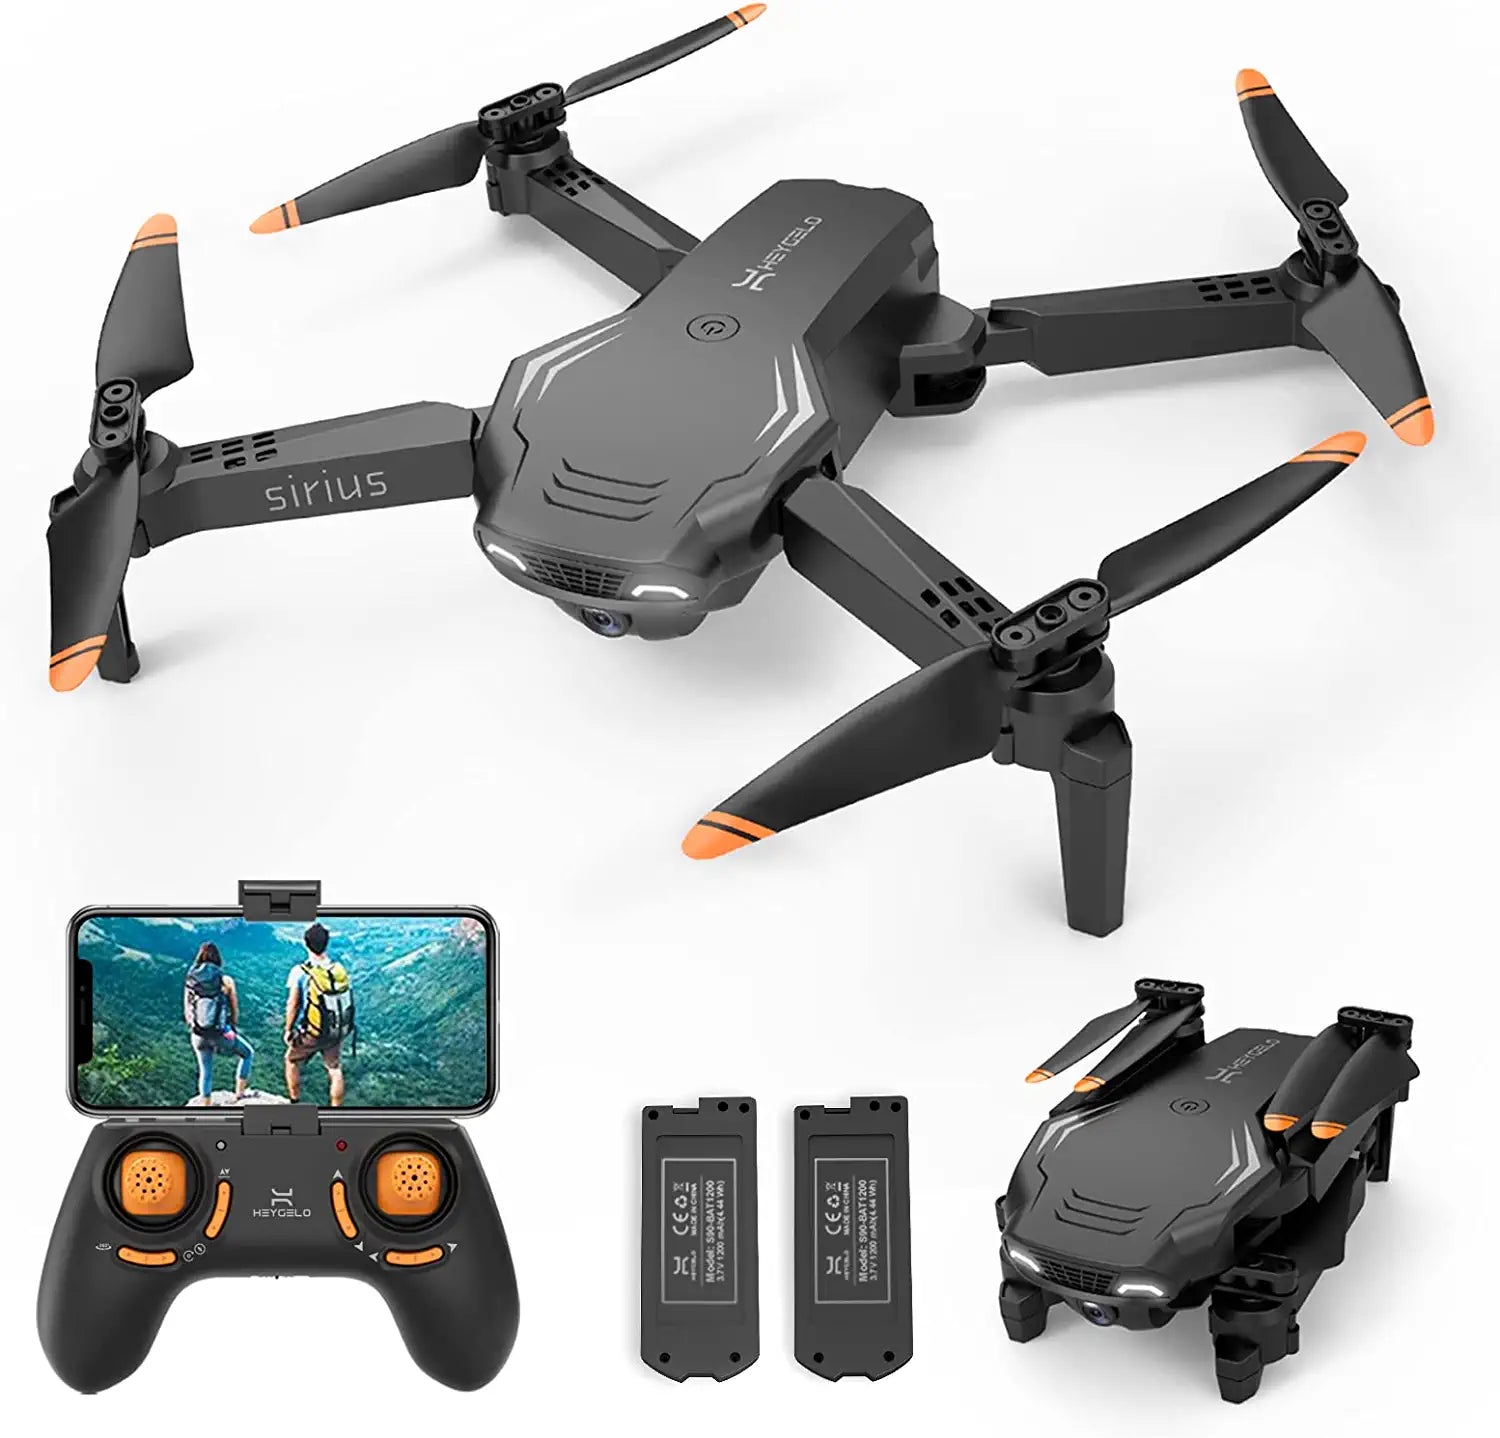 Heygelo S90 Drone with Camera for Adults - 1080P HD Mini FPV Drones for Kids Beginners, Voice/Gesture Control,2 Batteries - RCDrone